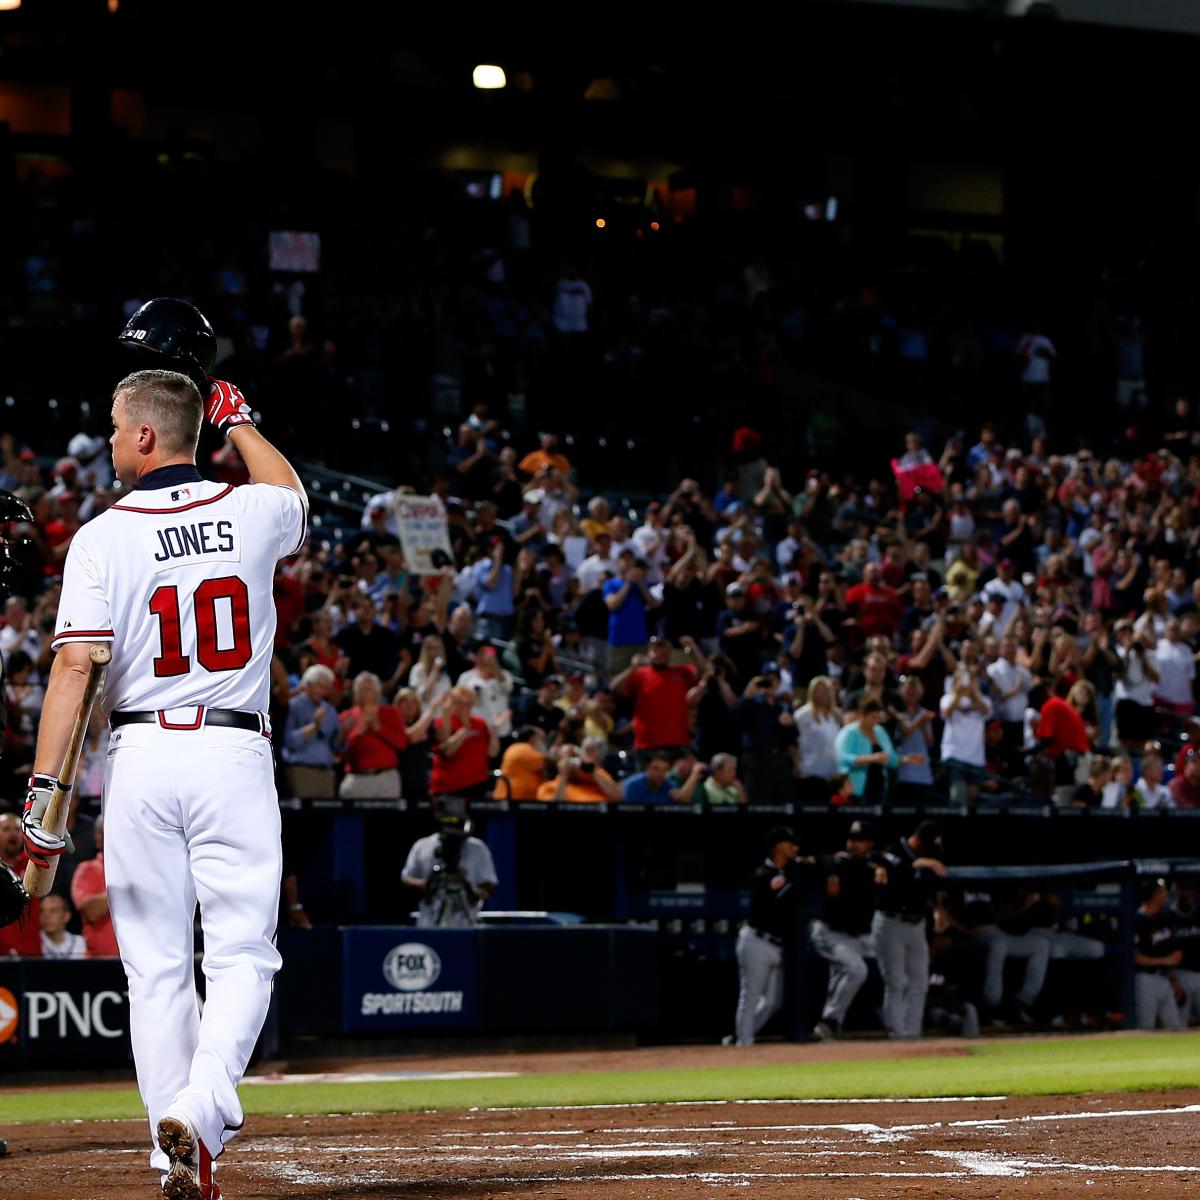 Chipper Jones' Best Moments, A look back at some of Chipper Jones'  greatest moments., By Atlanta Braves Highlights